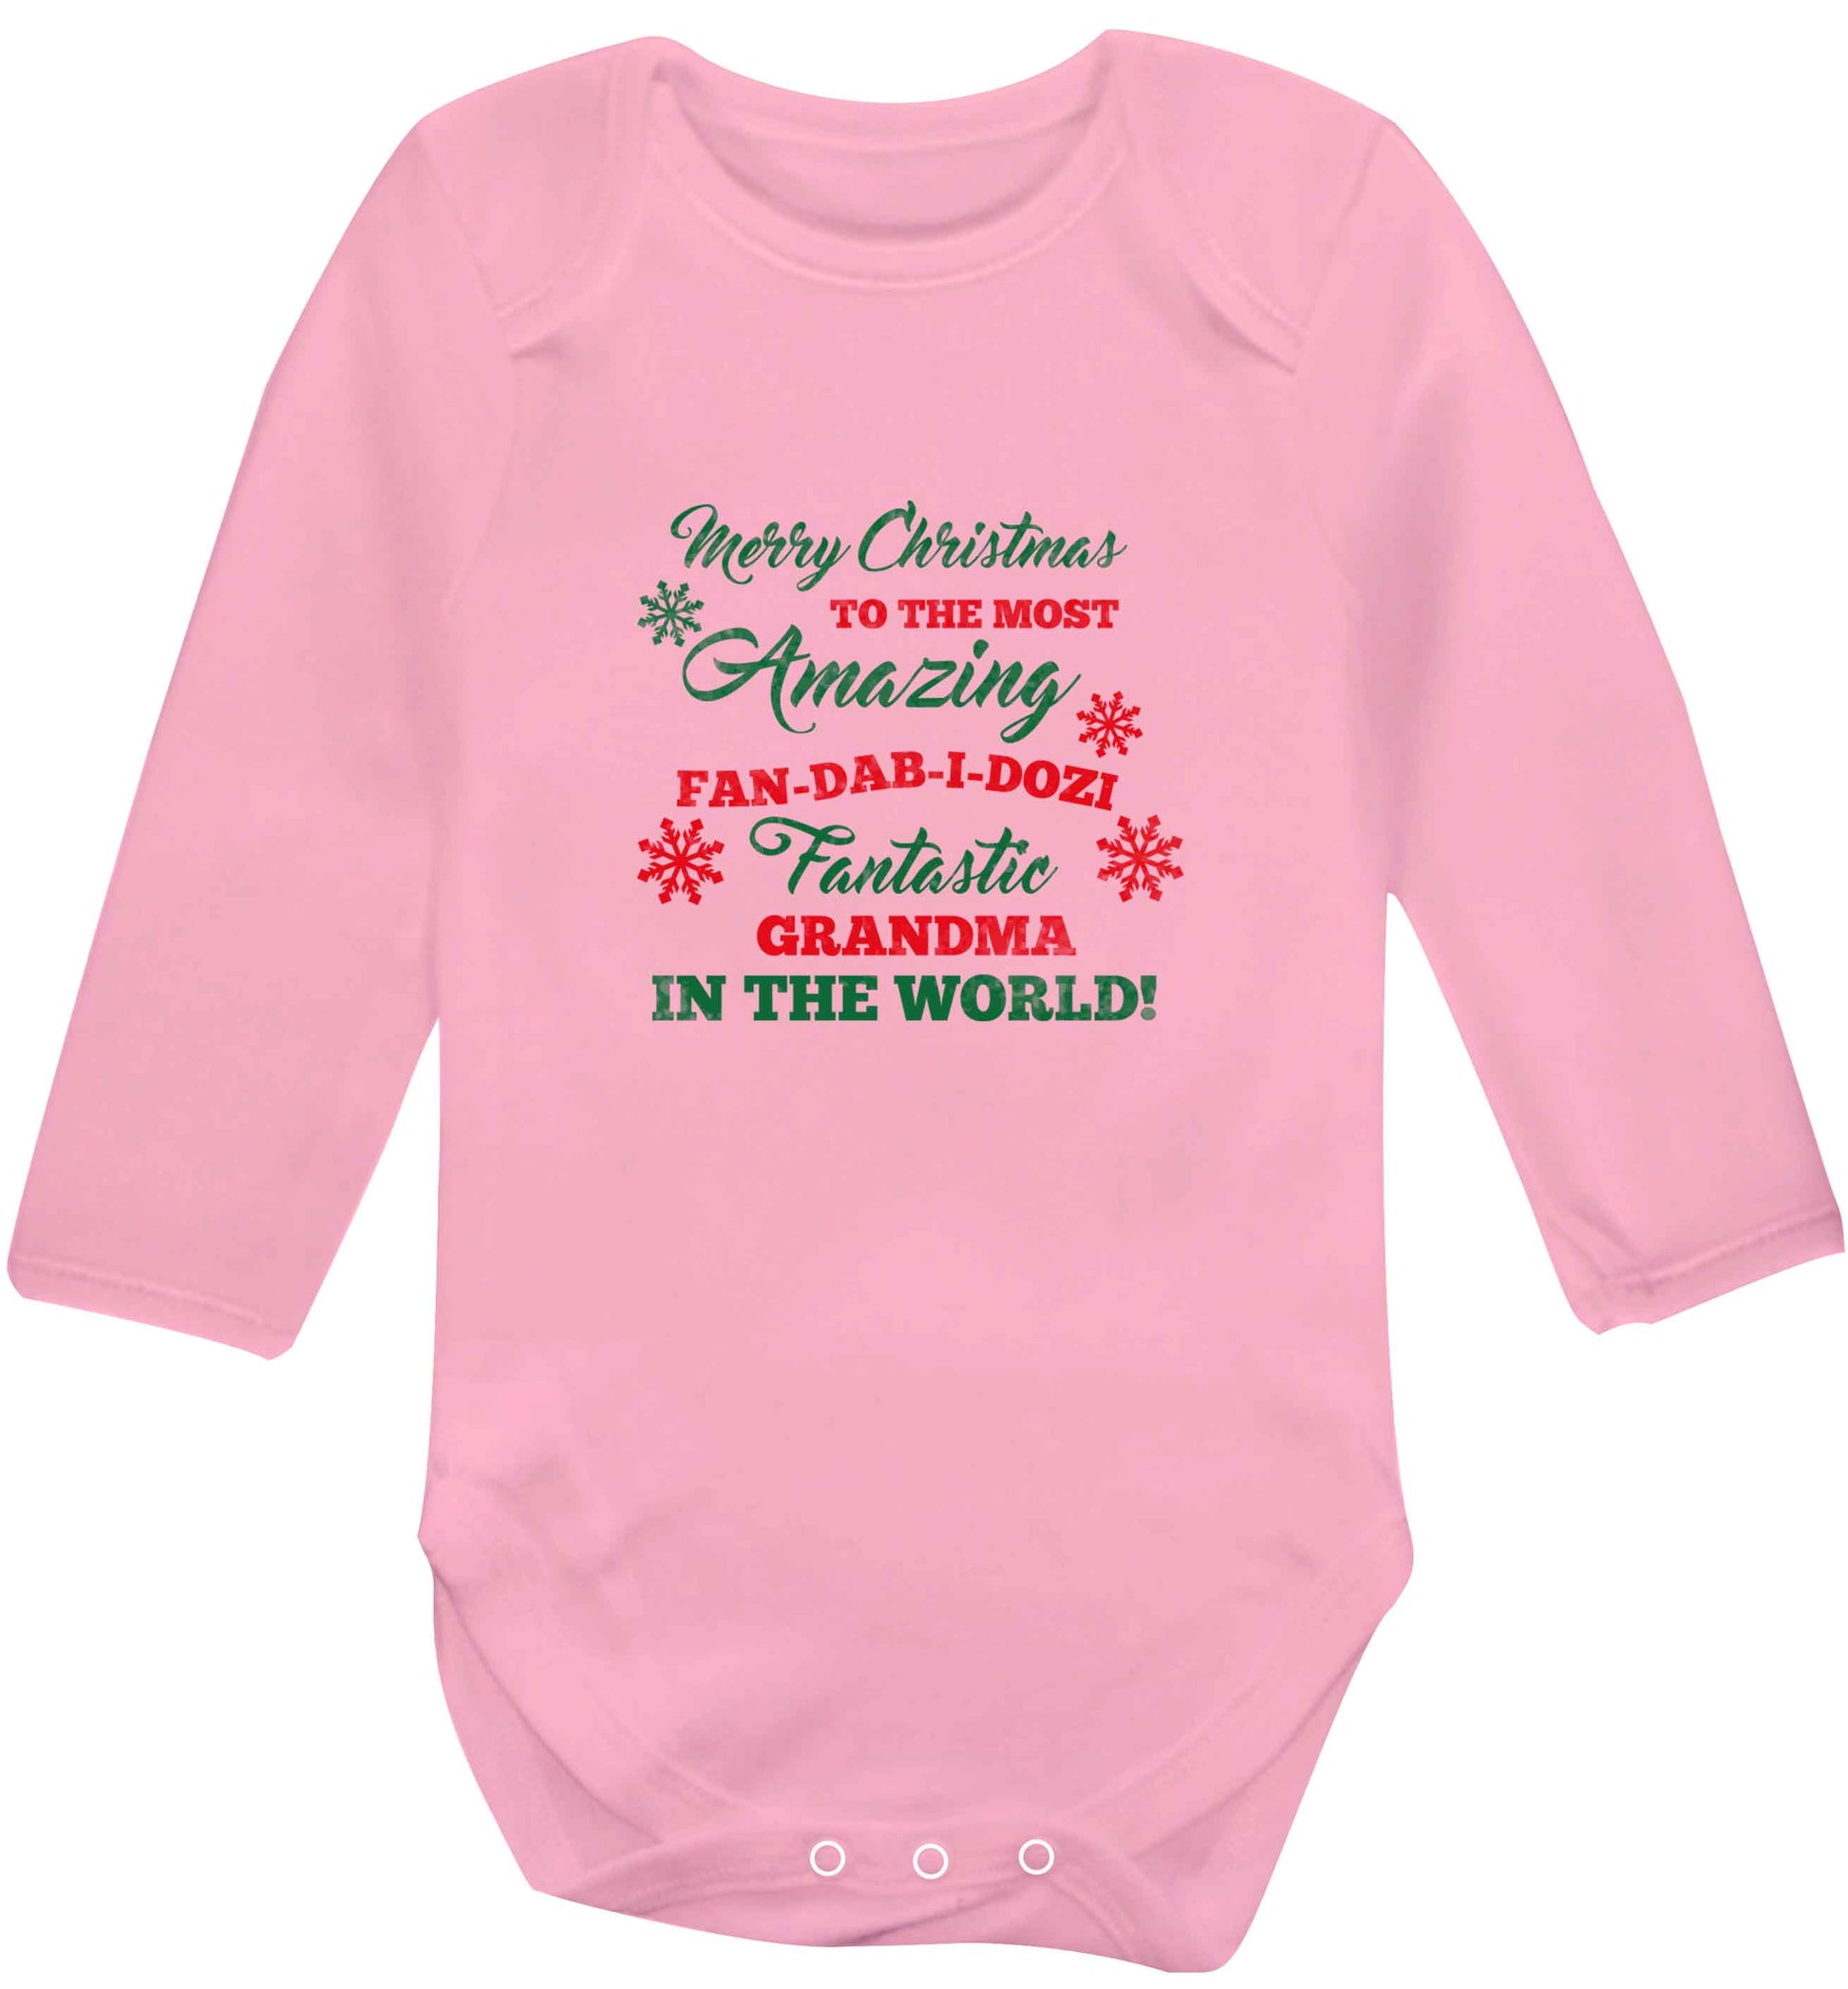 Merry Christmas to the most amazing fan-dab-i-dozi fantasic Grandma in the world baby vest long sleeved pale pink 6-12 months